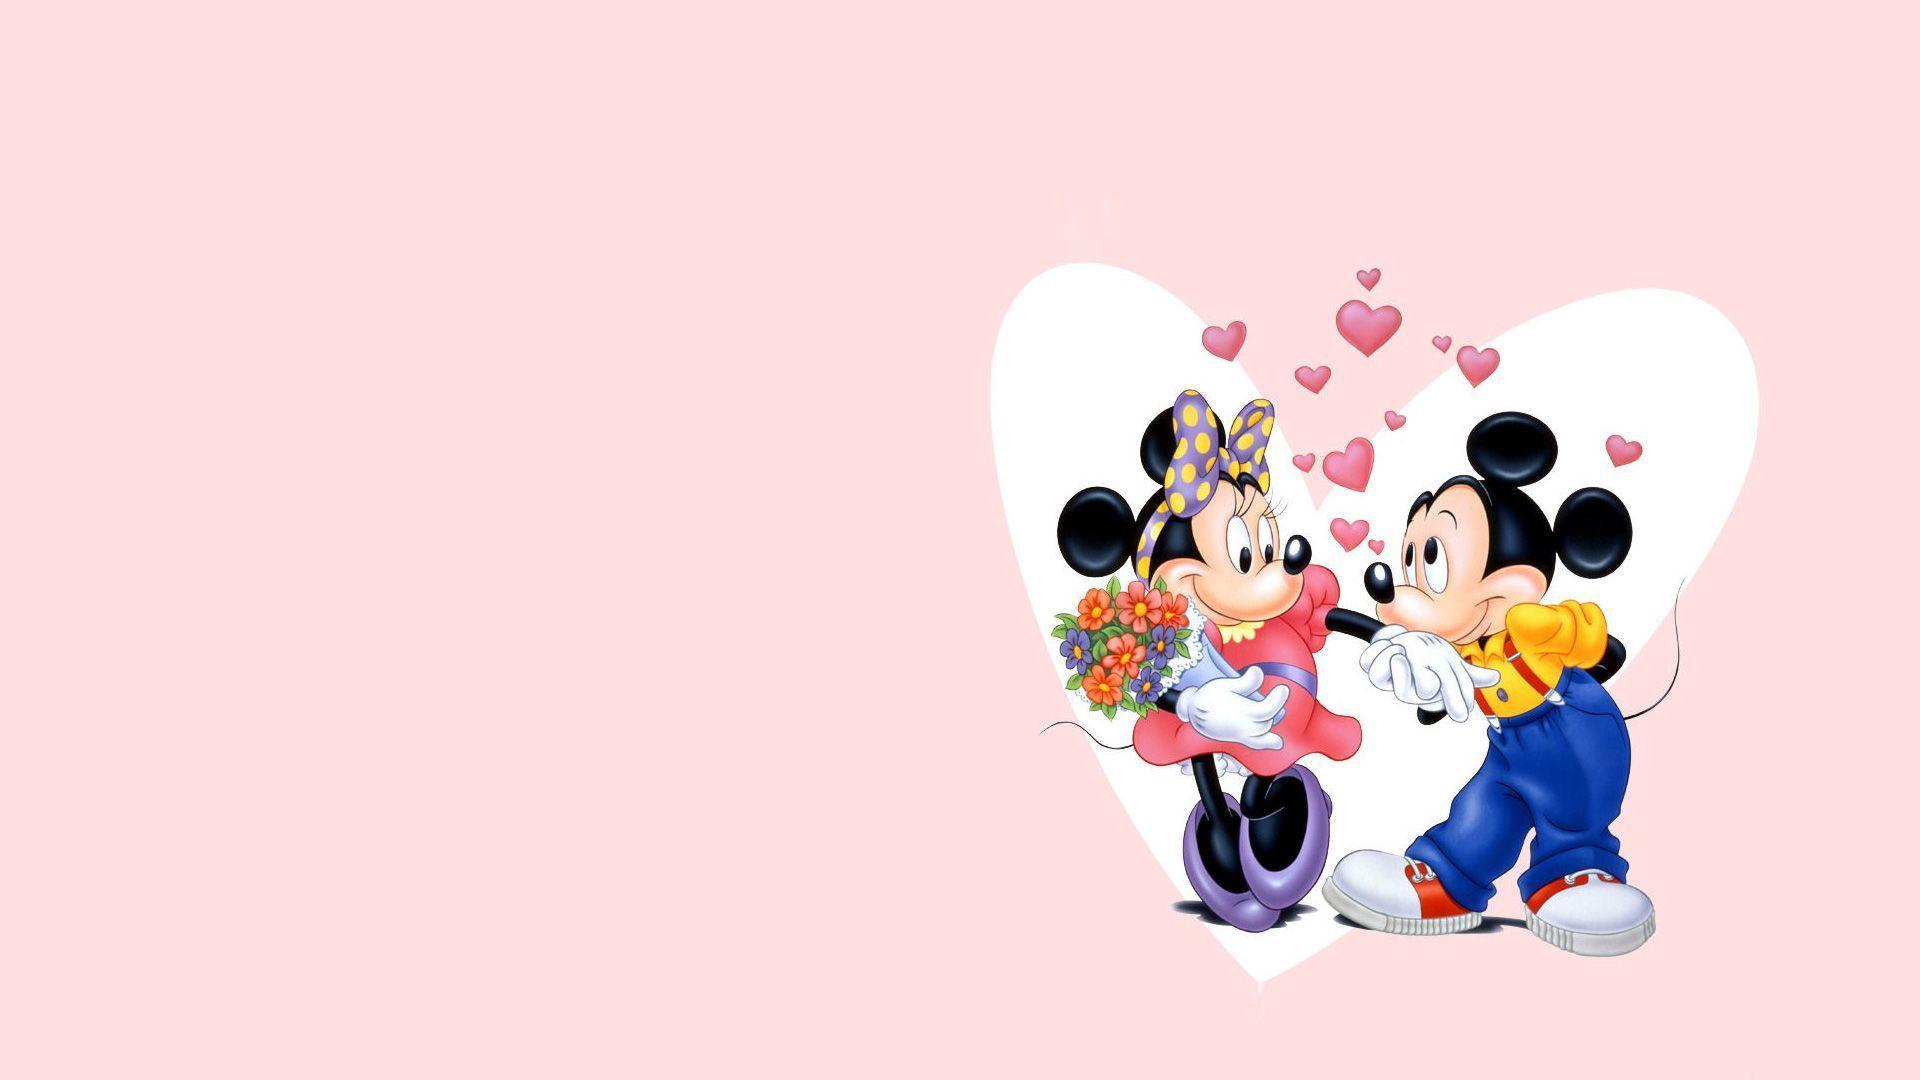 Mickey Mouse And Minnie Mouse Wallpaper. Foolhardi